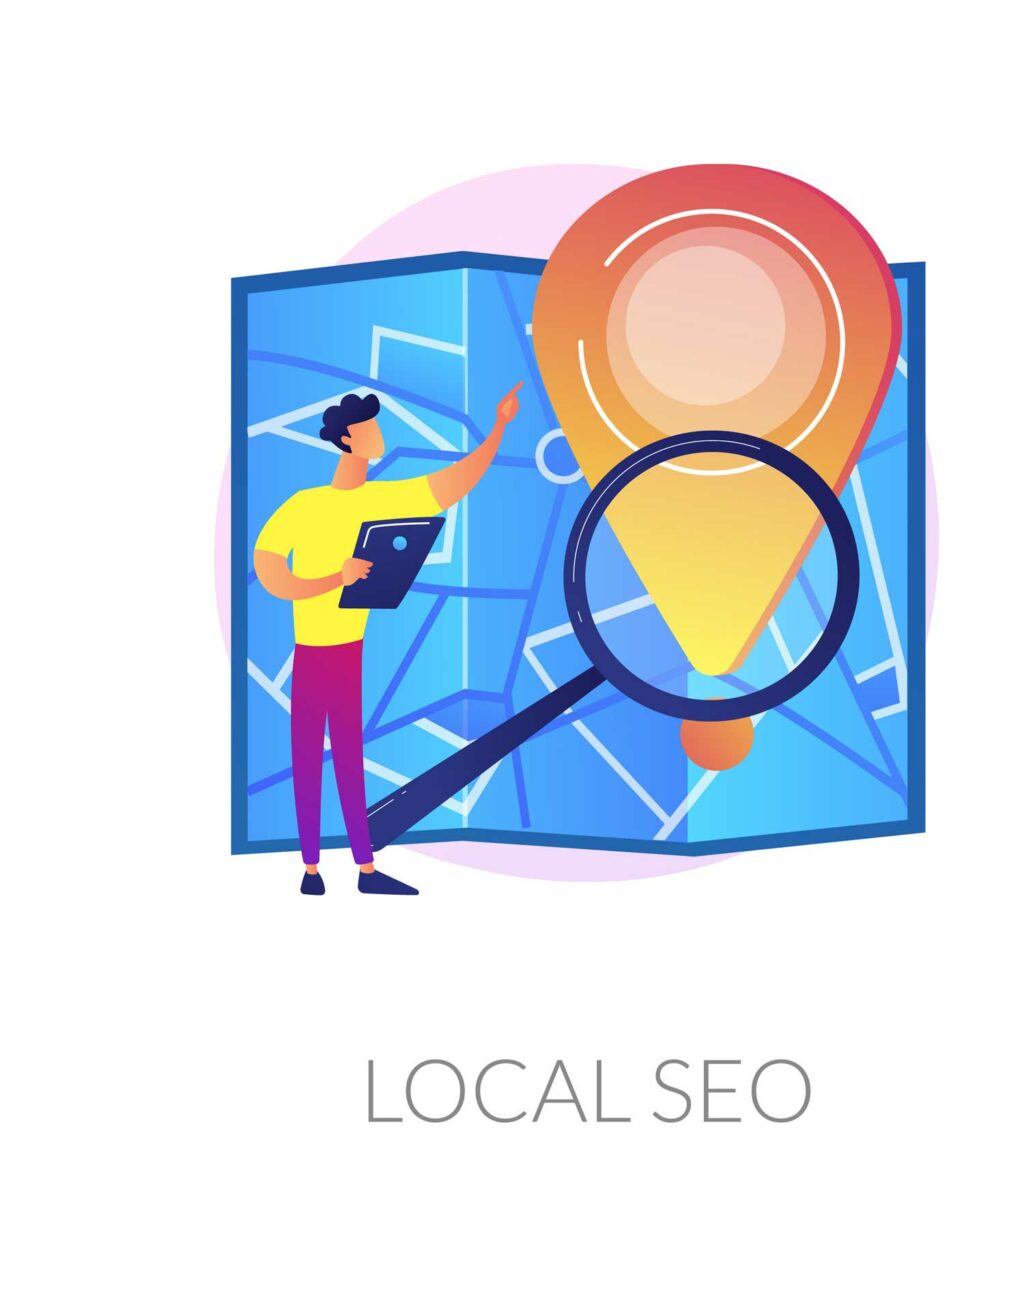 local seo with map